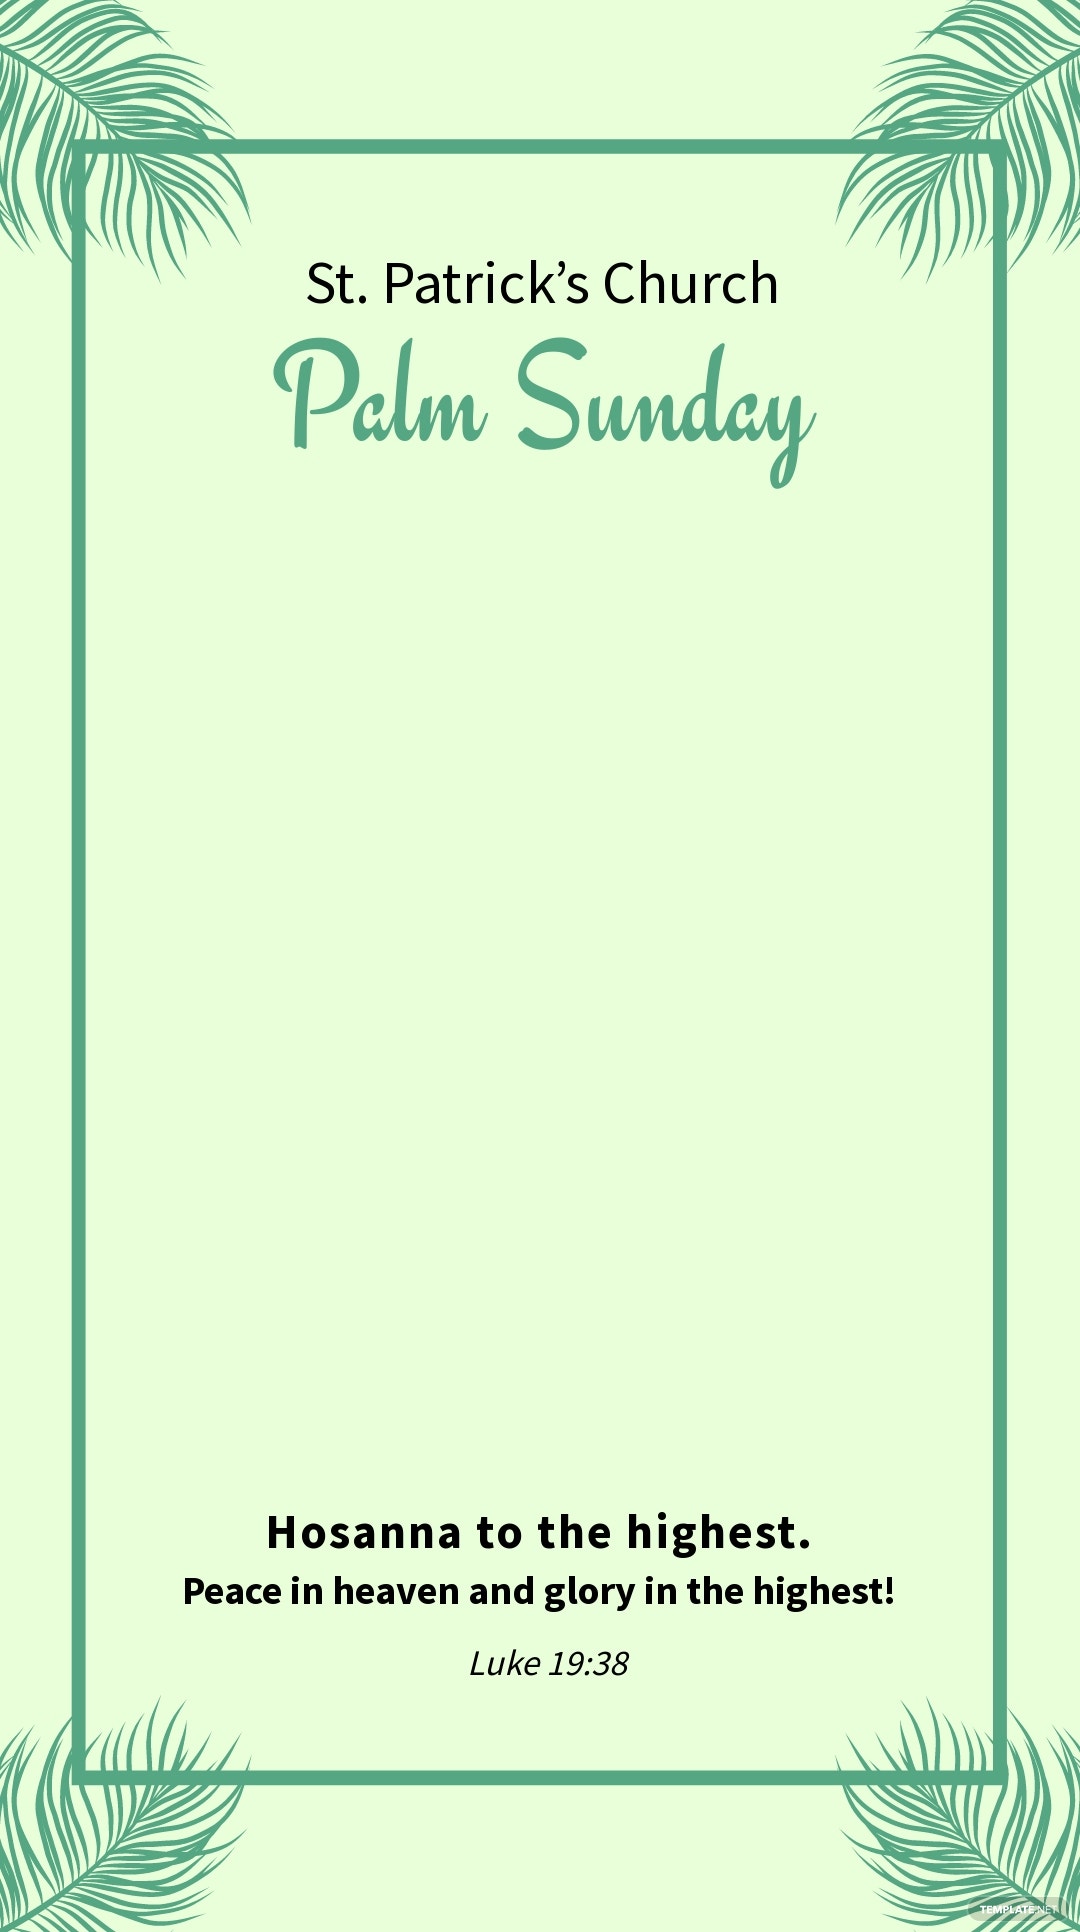 palm-sunday-quote-snapchat-geofilter